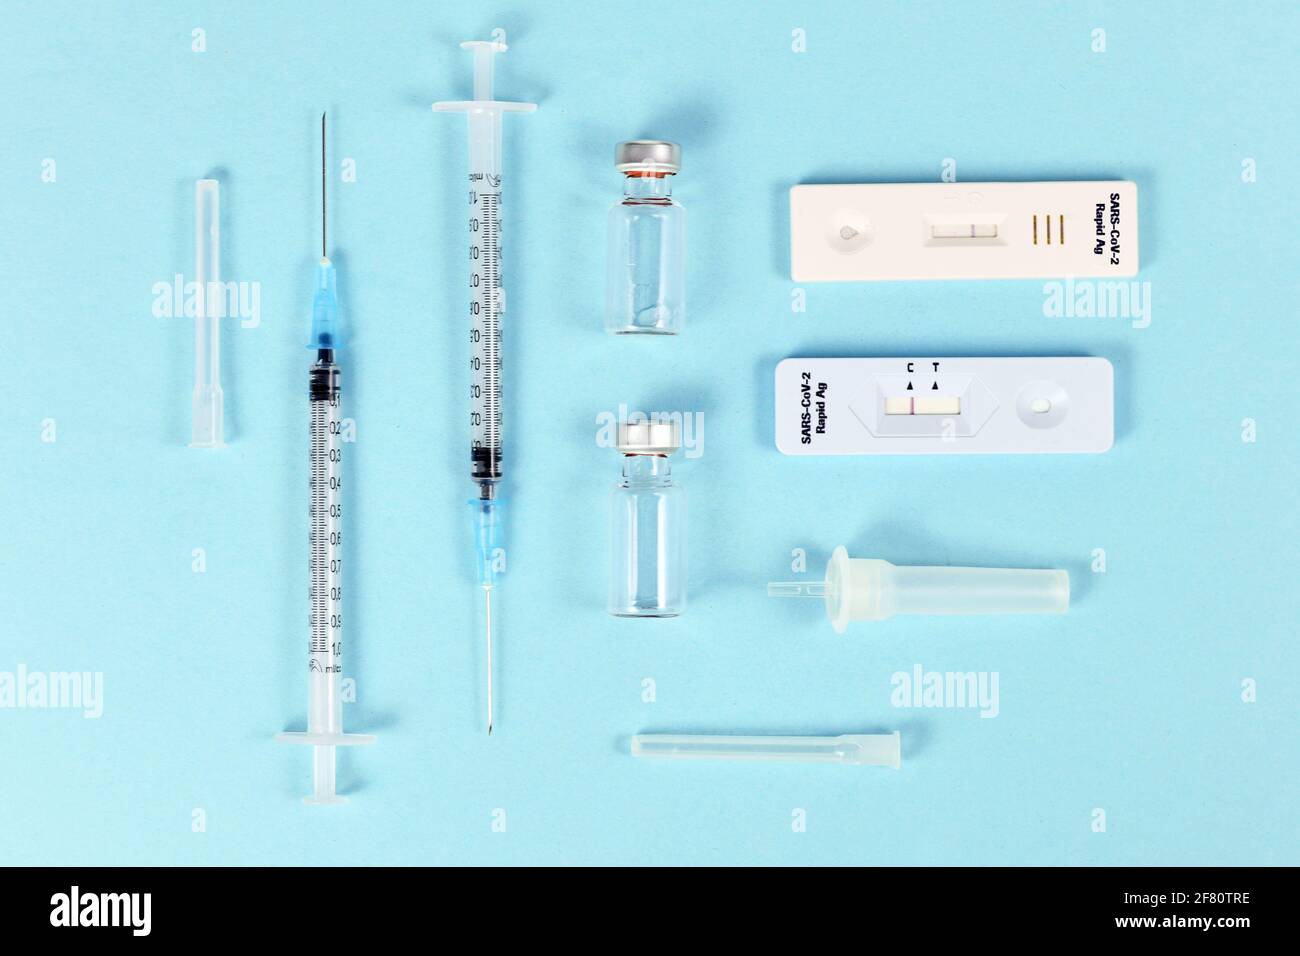 Rapid antigen test and vaccine vials with syringes. Tools to fight Corona Virus pandemic. Stock Photo